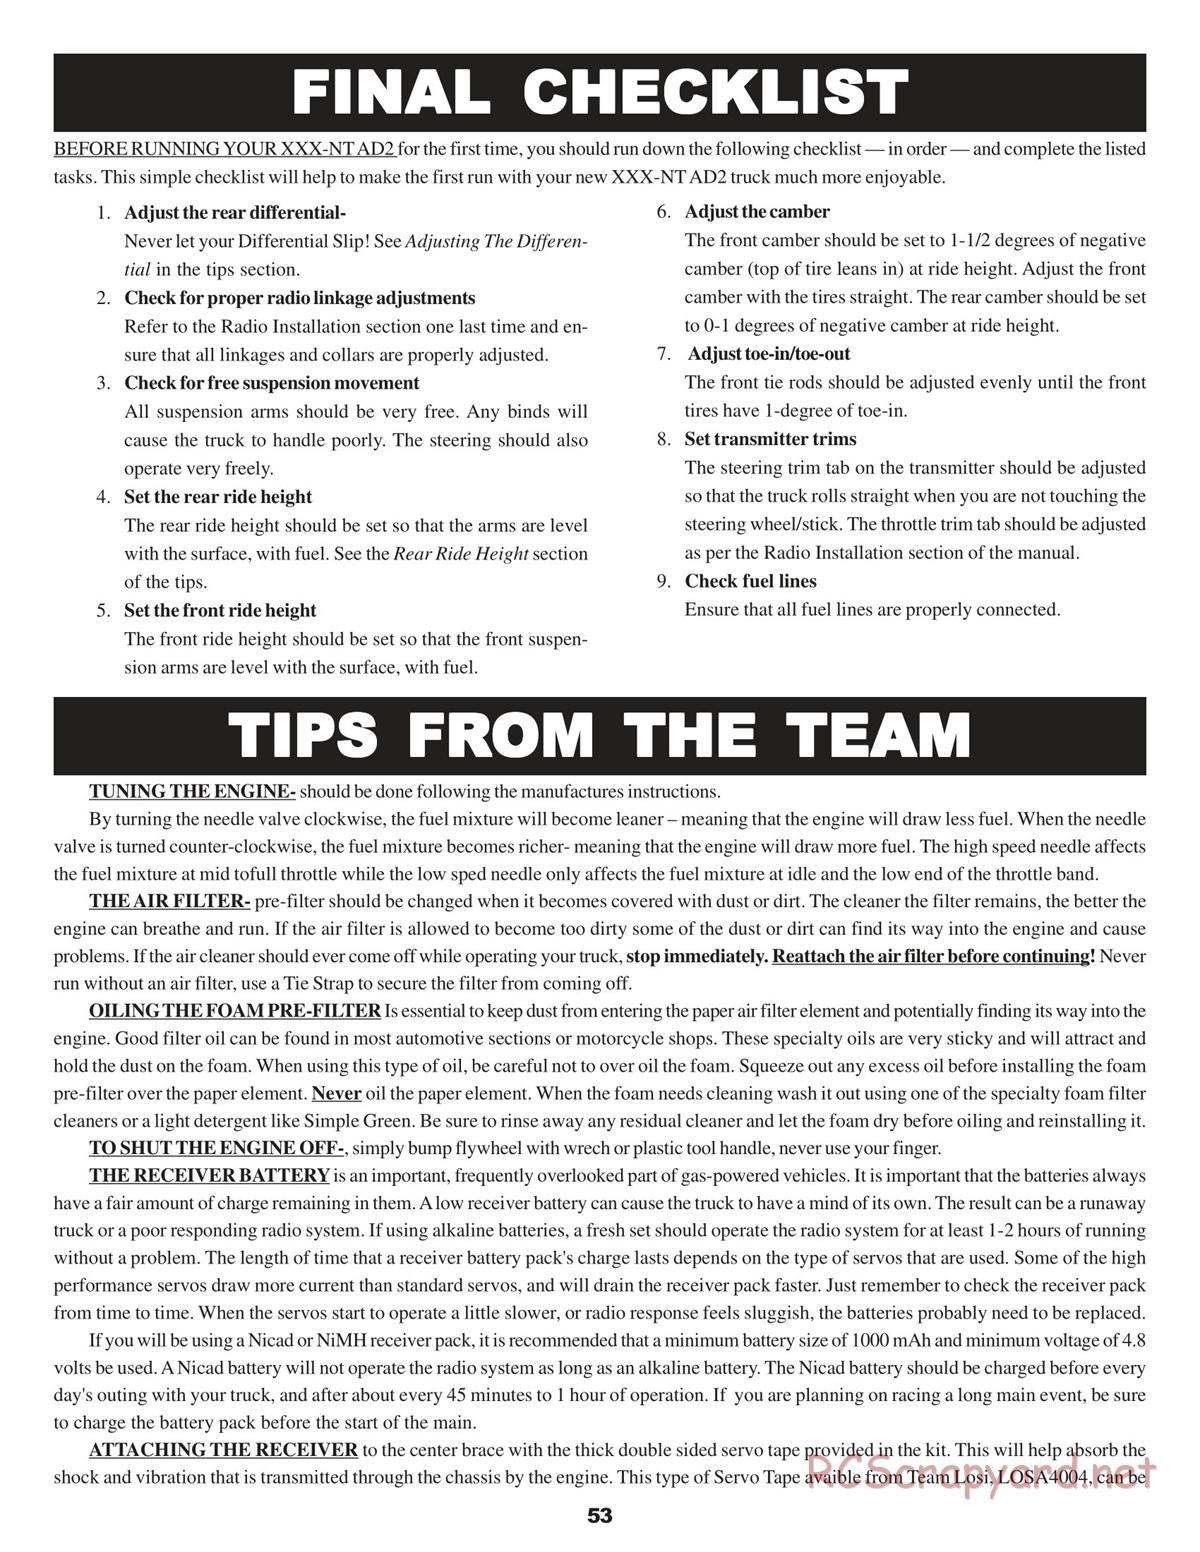 Team Losi - XXX NT AD2 - Manual - Page 57